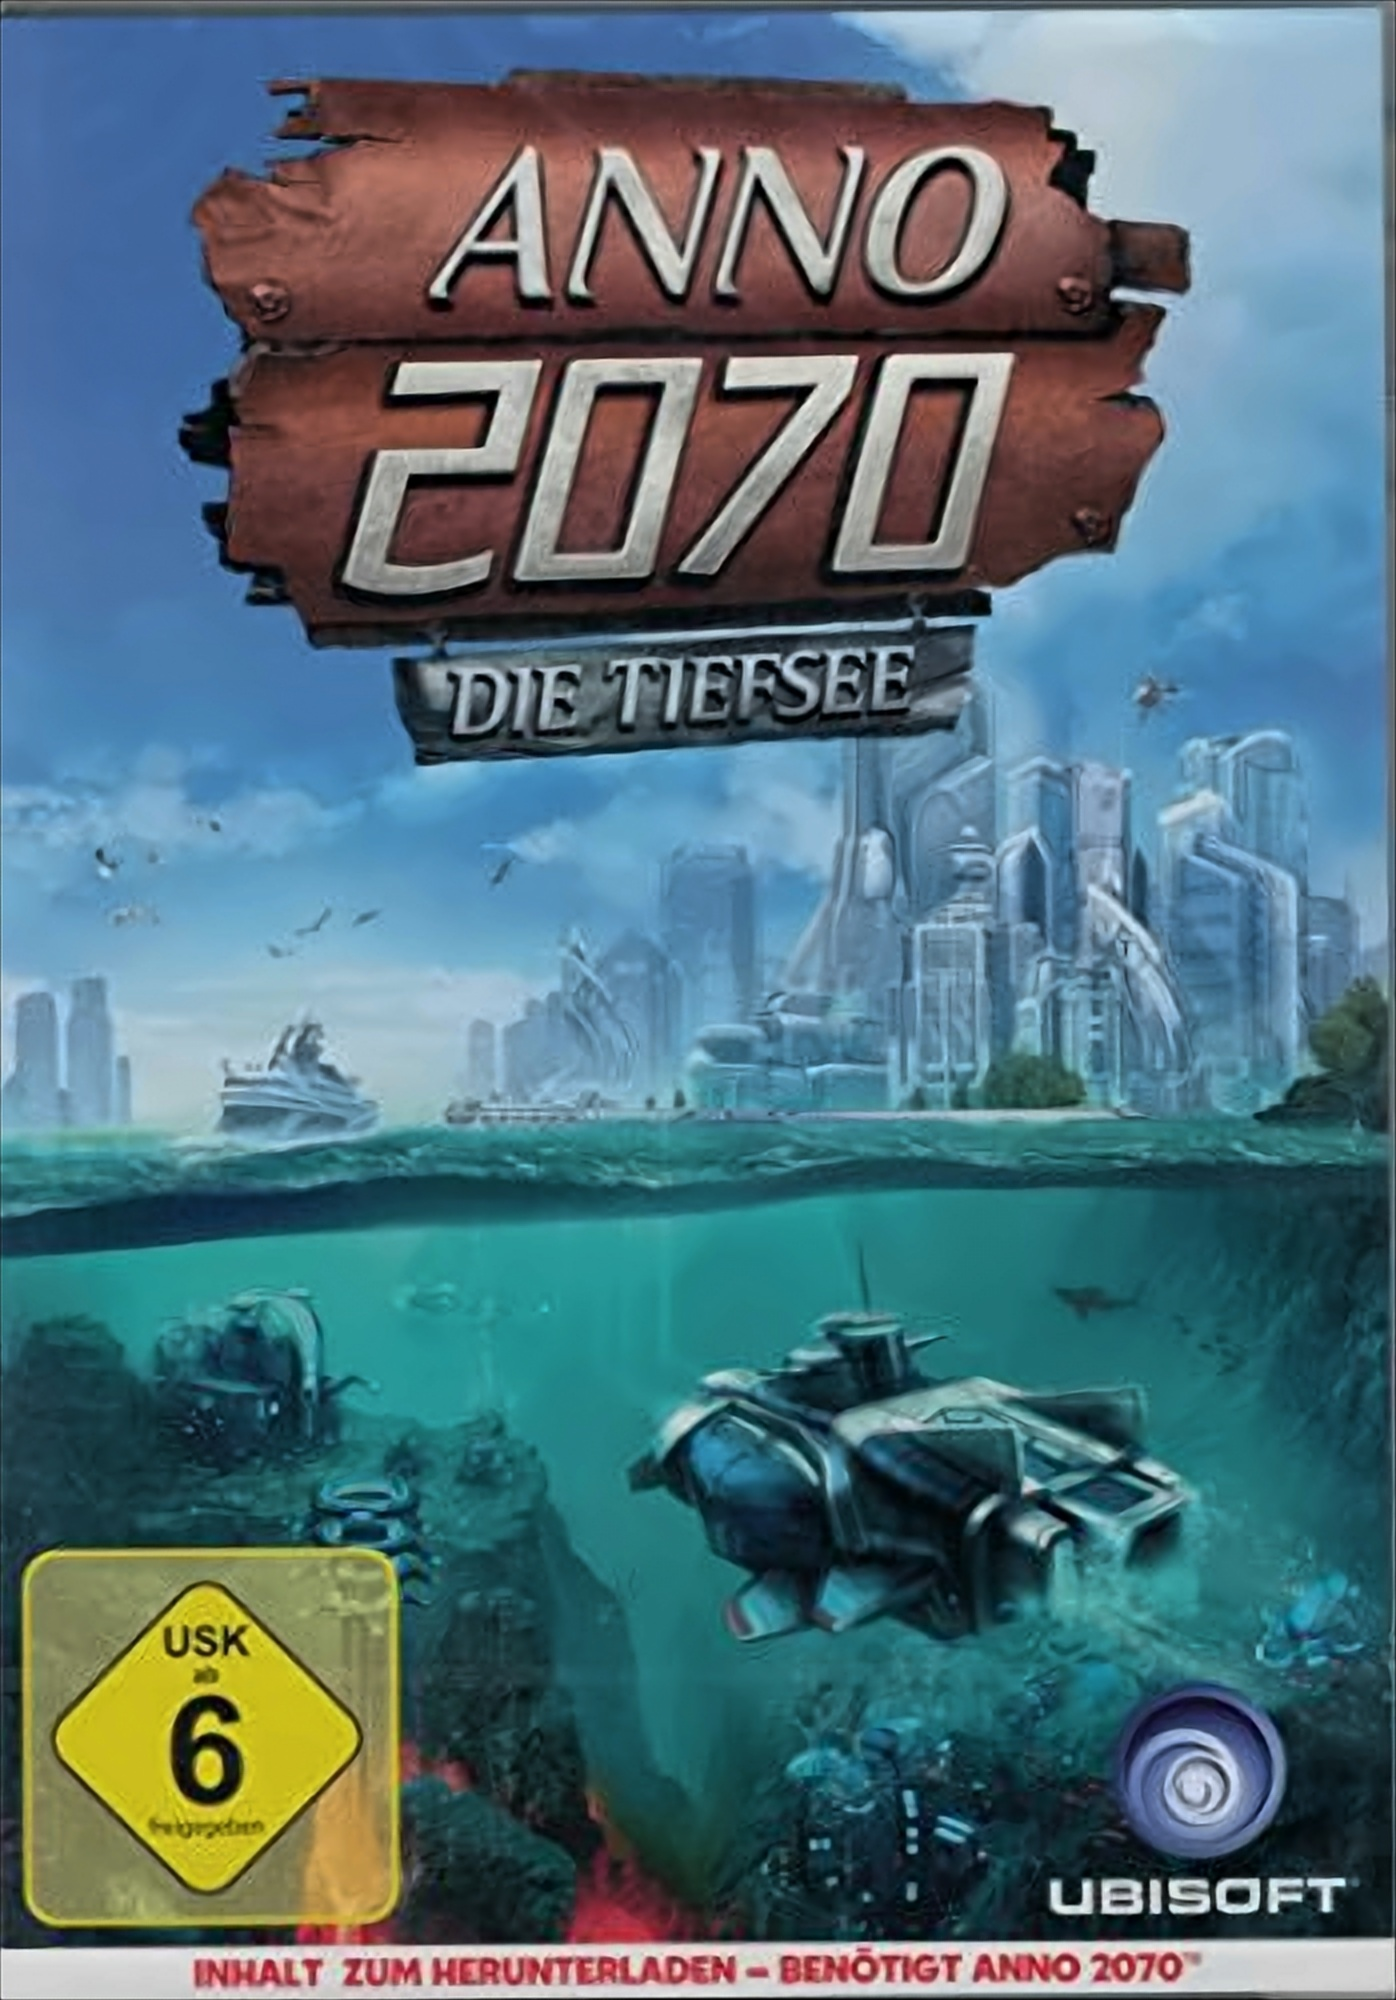 (Add-on) Die Tiefsee 2070 (DLC - [PC] only) - ANNO